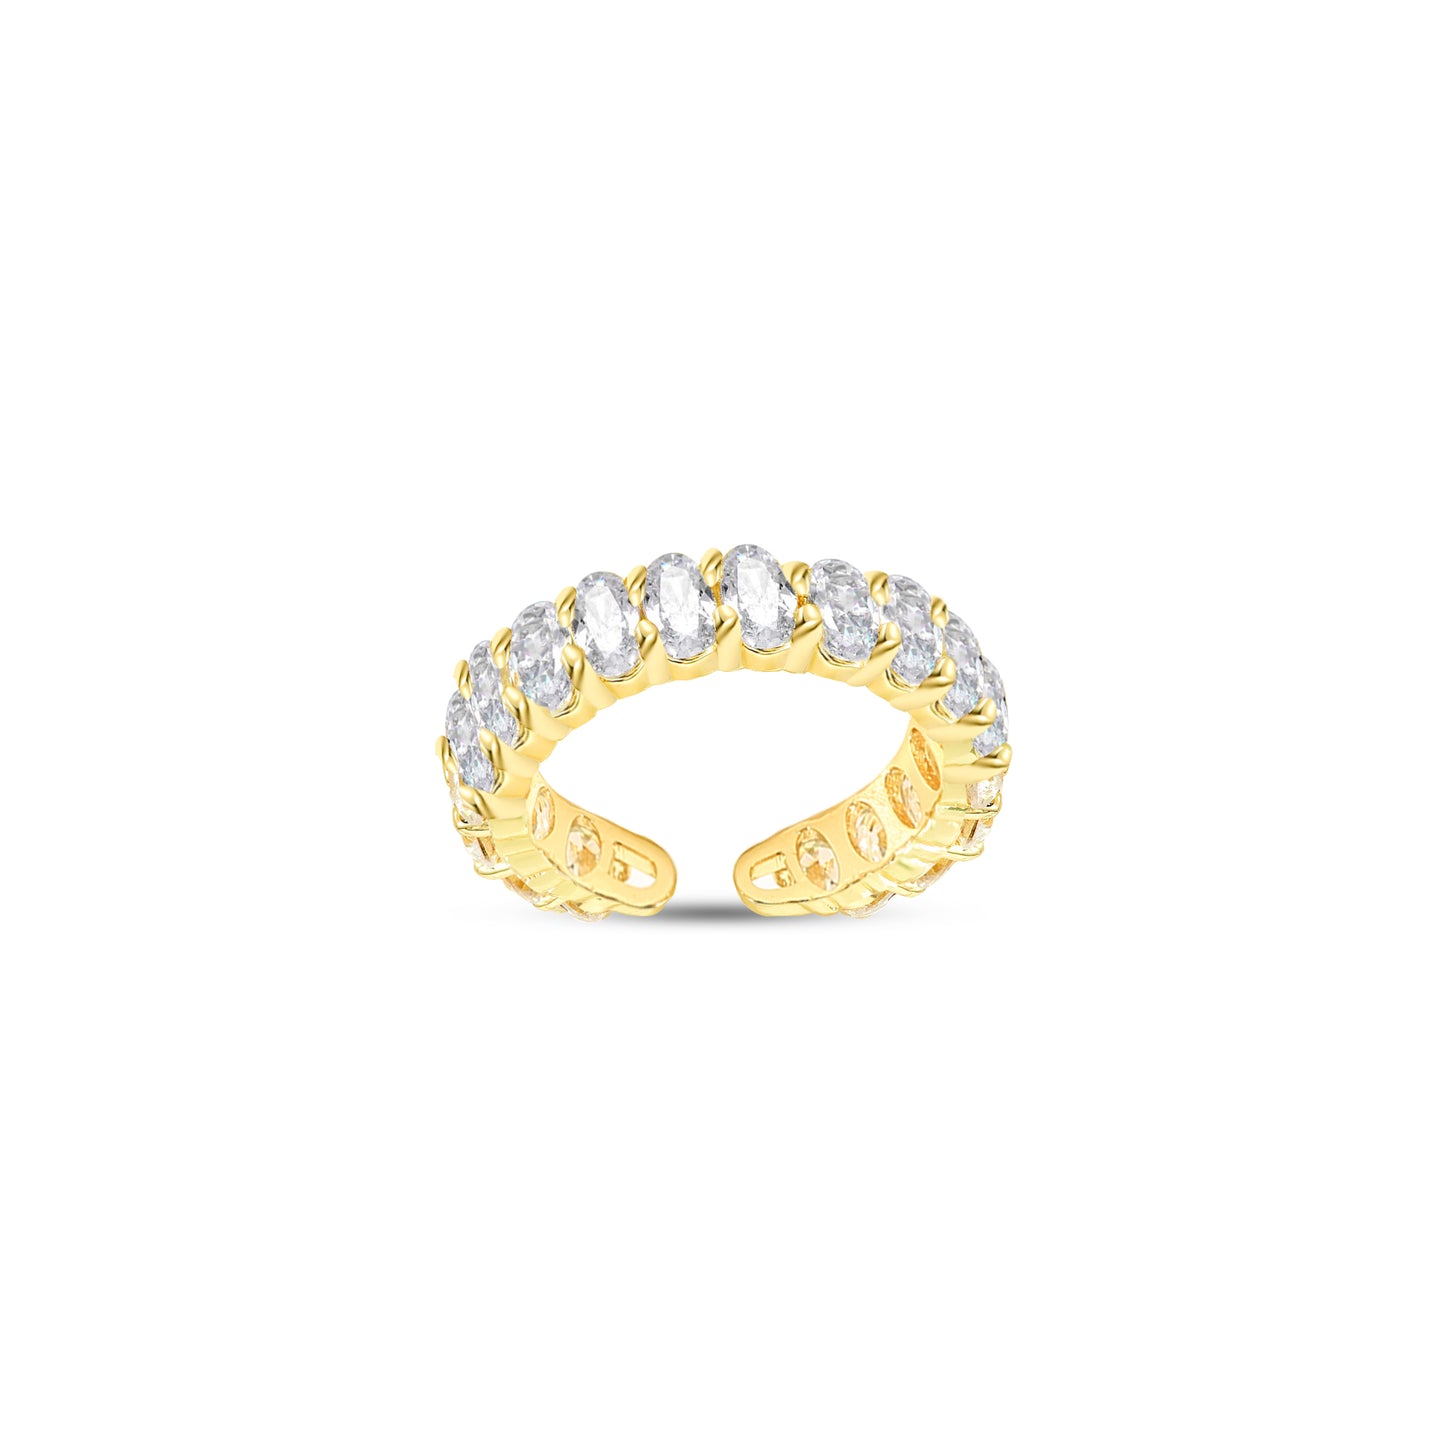 The Quinn Oval Stone Ring